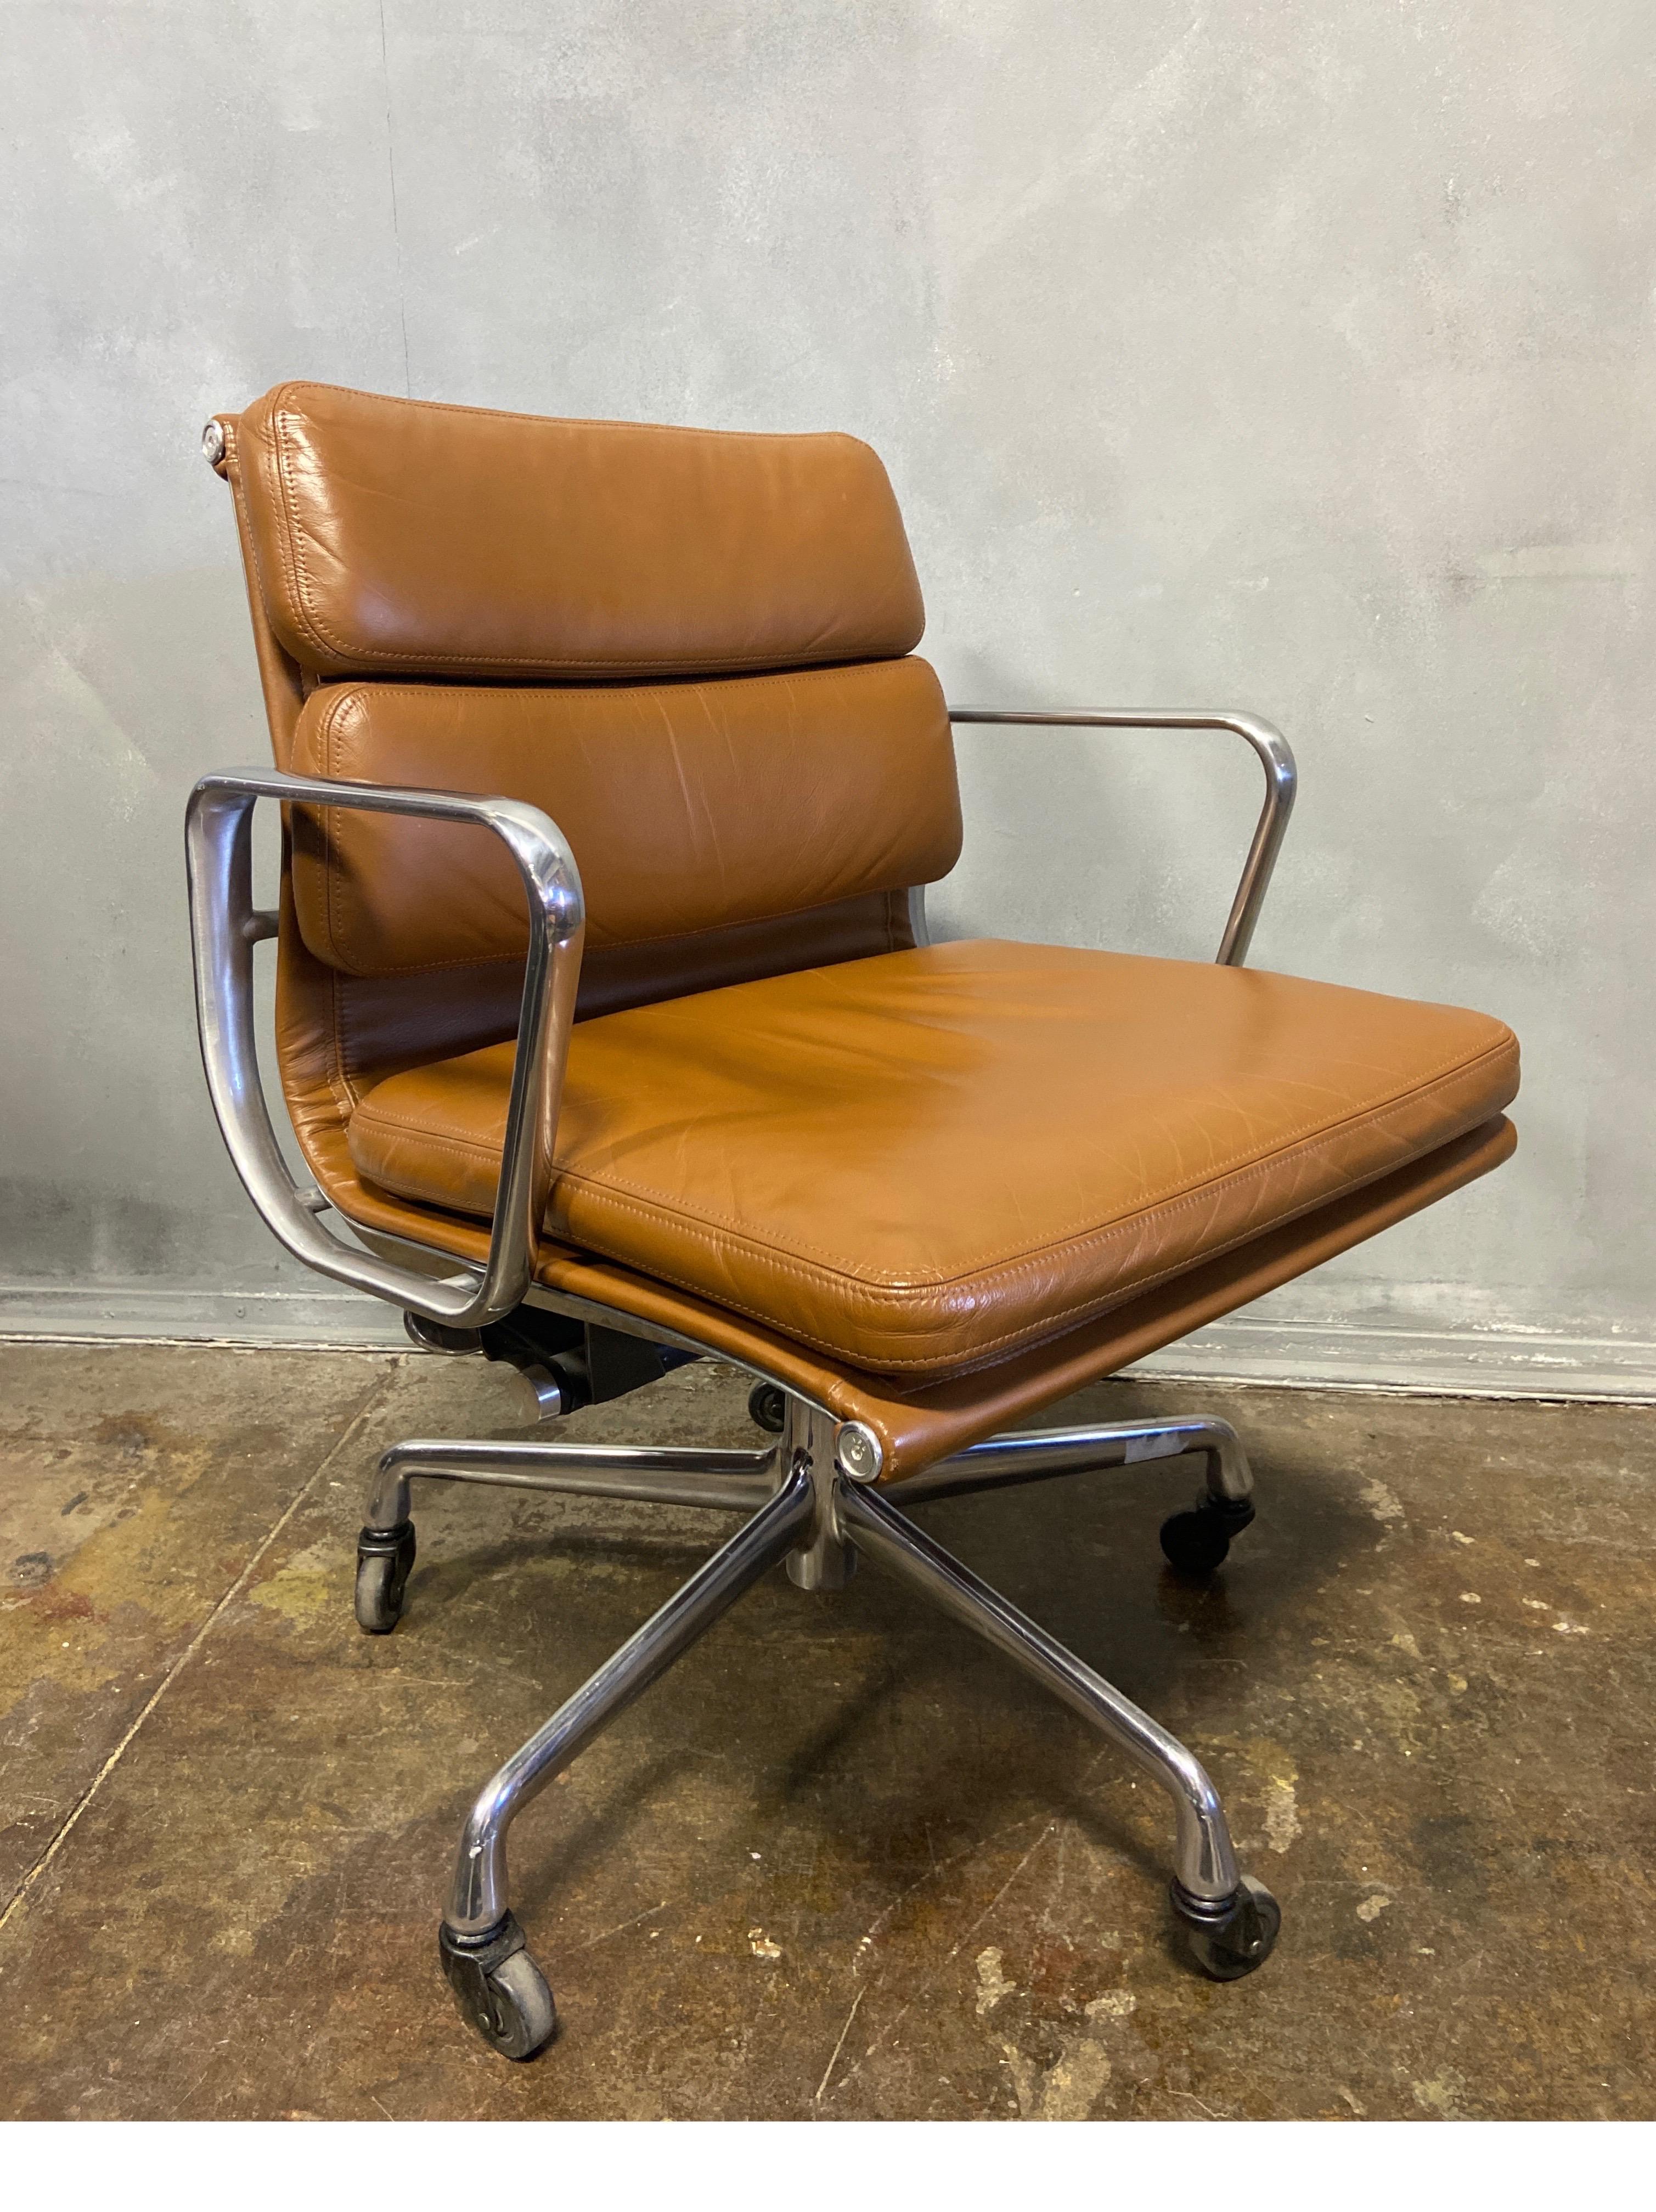 For your consideration is this authentic Eames for Herman Miller vintage soft pad chairs in Brown leather. Adjustable tilt and height adjustment. These authentic vintage examples are icons of Mid-Century Modern design. These chairs are part of the